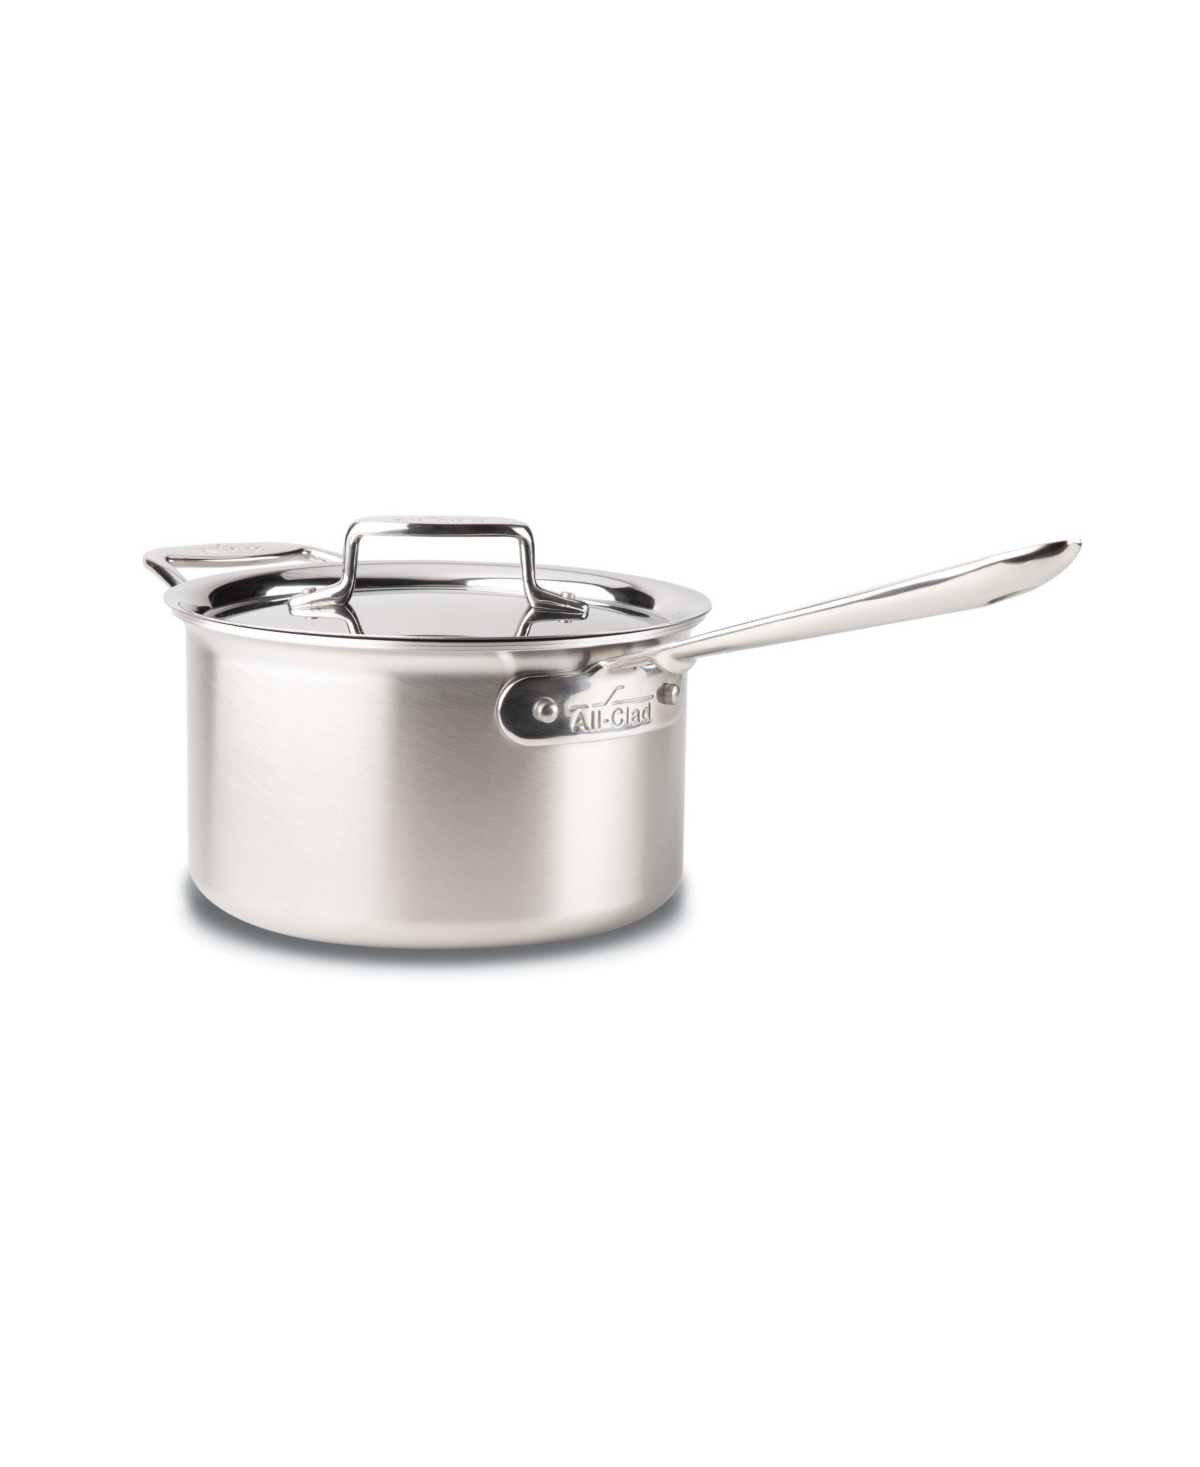 All-Clad D5 Stainless Steel Brushed 5-Ply Bonded 4-Quart Sauce Pan with Lid